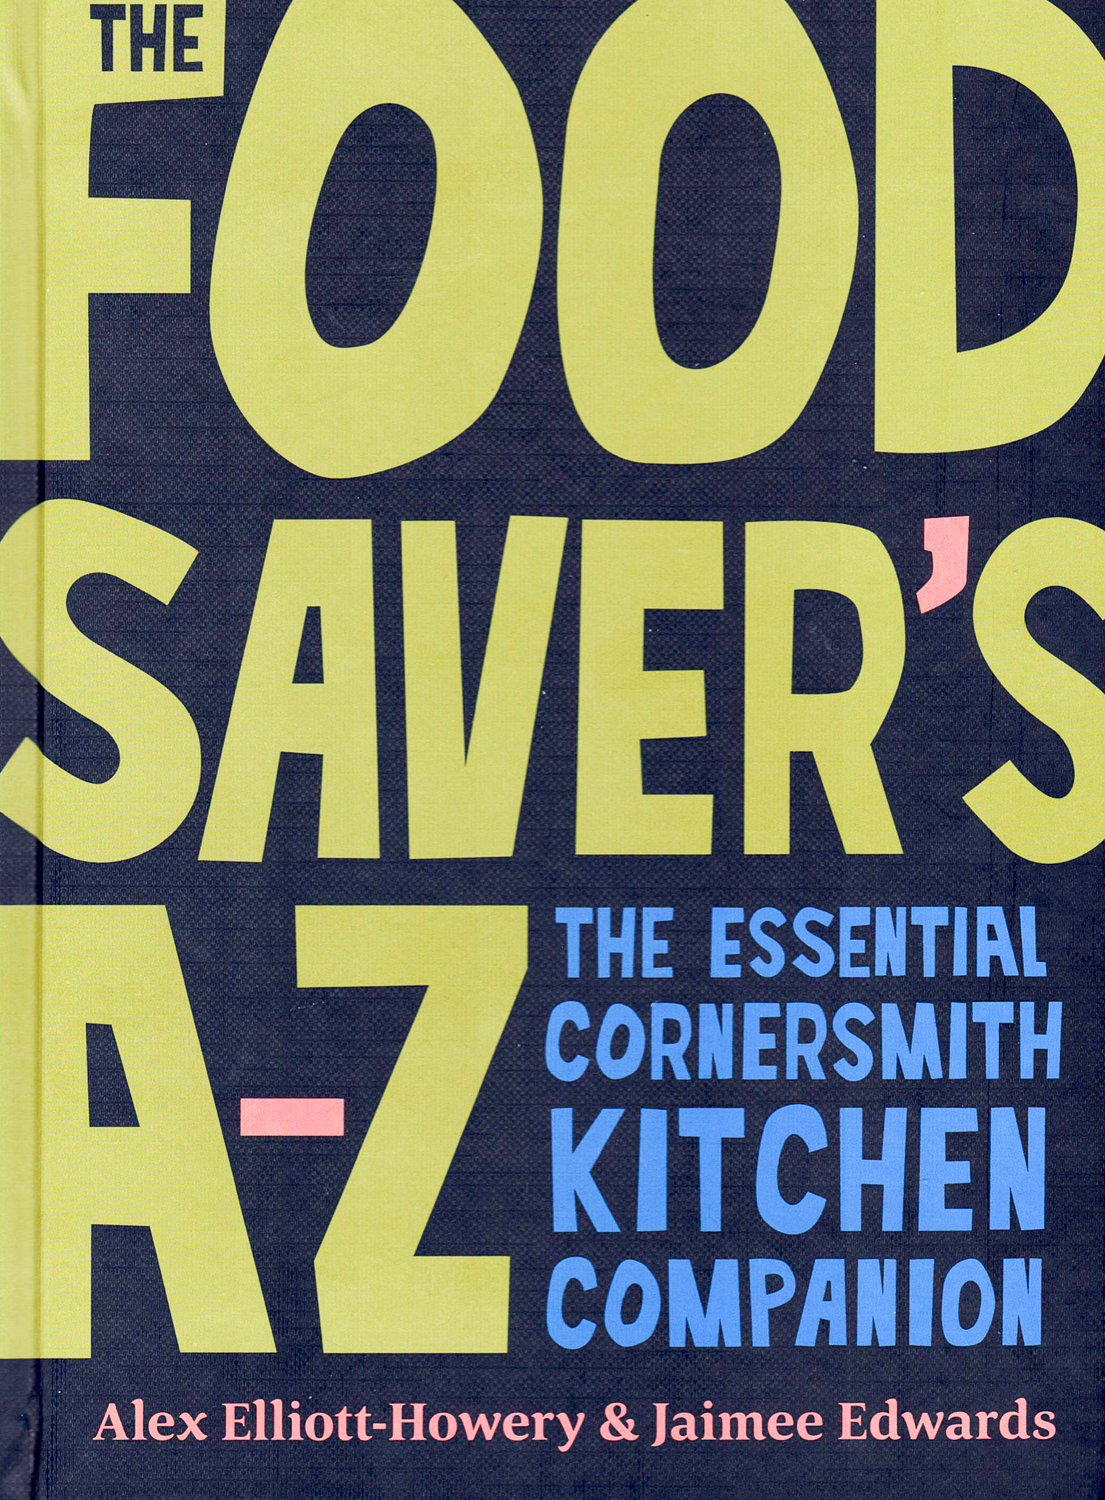 Black book cover with the title "Food Saver's A to Z The Essential Cornersmith Kitchen Companion"